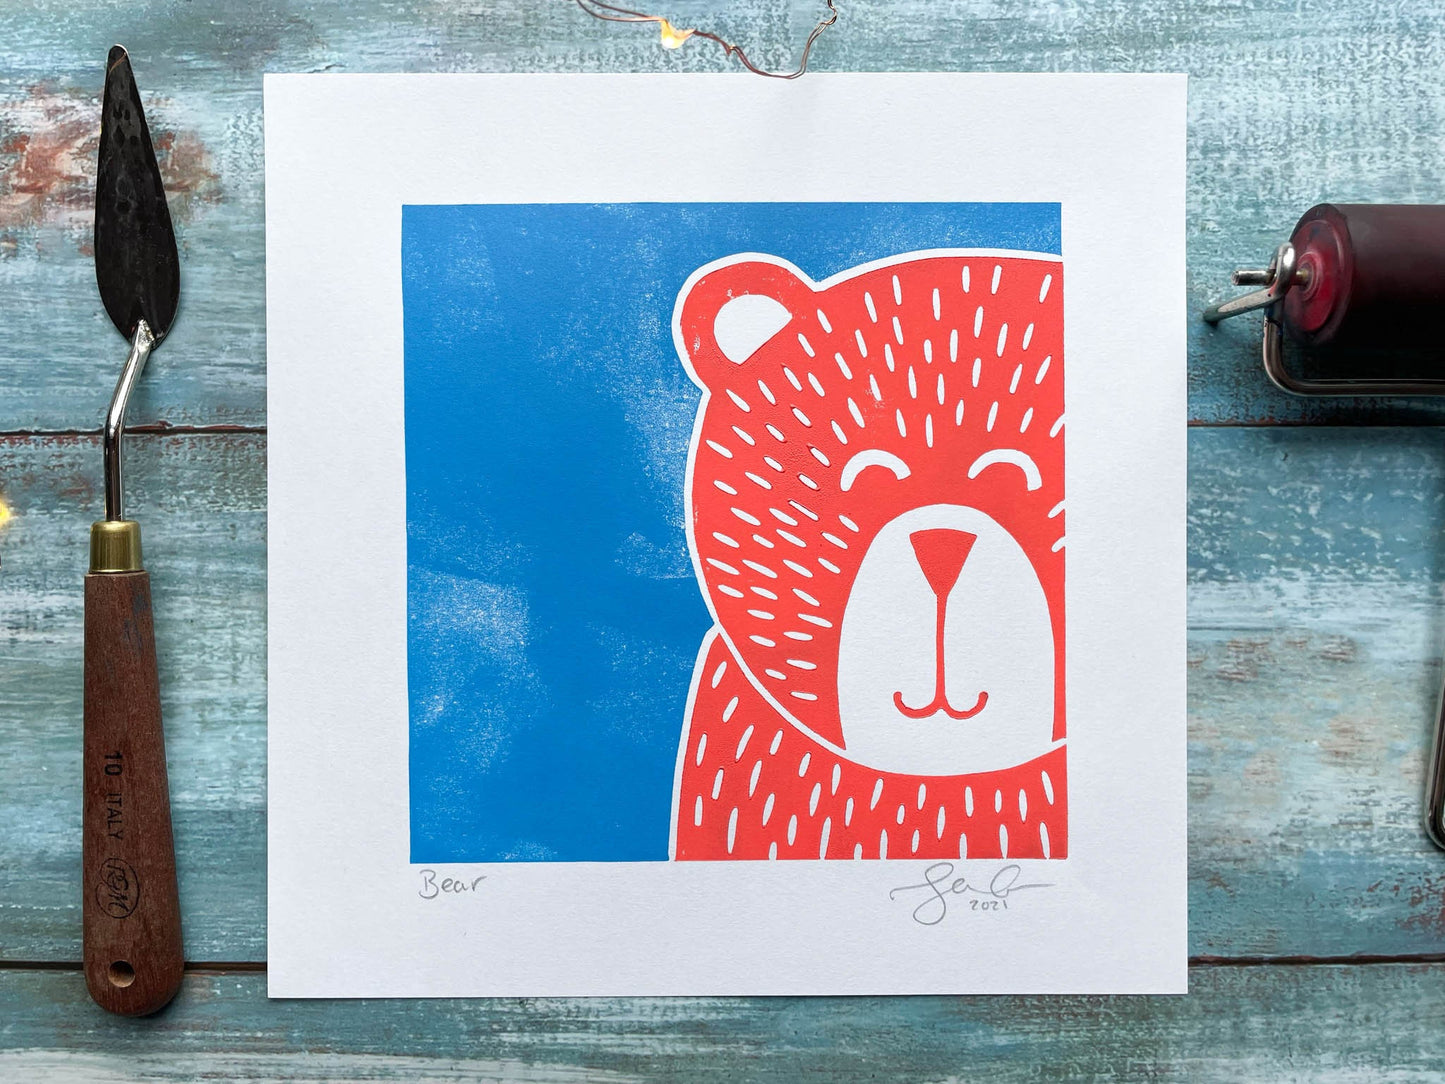 A multiblock lino print of a pink bear with a blue background